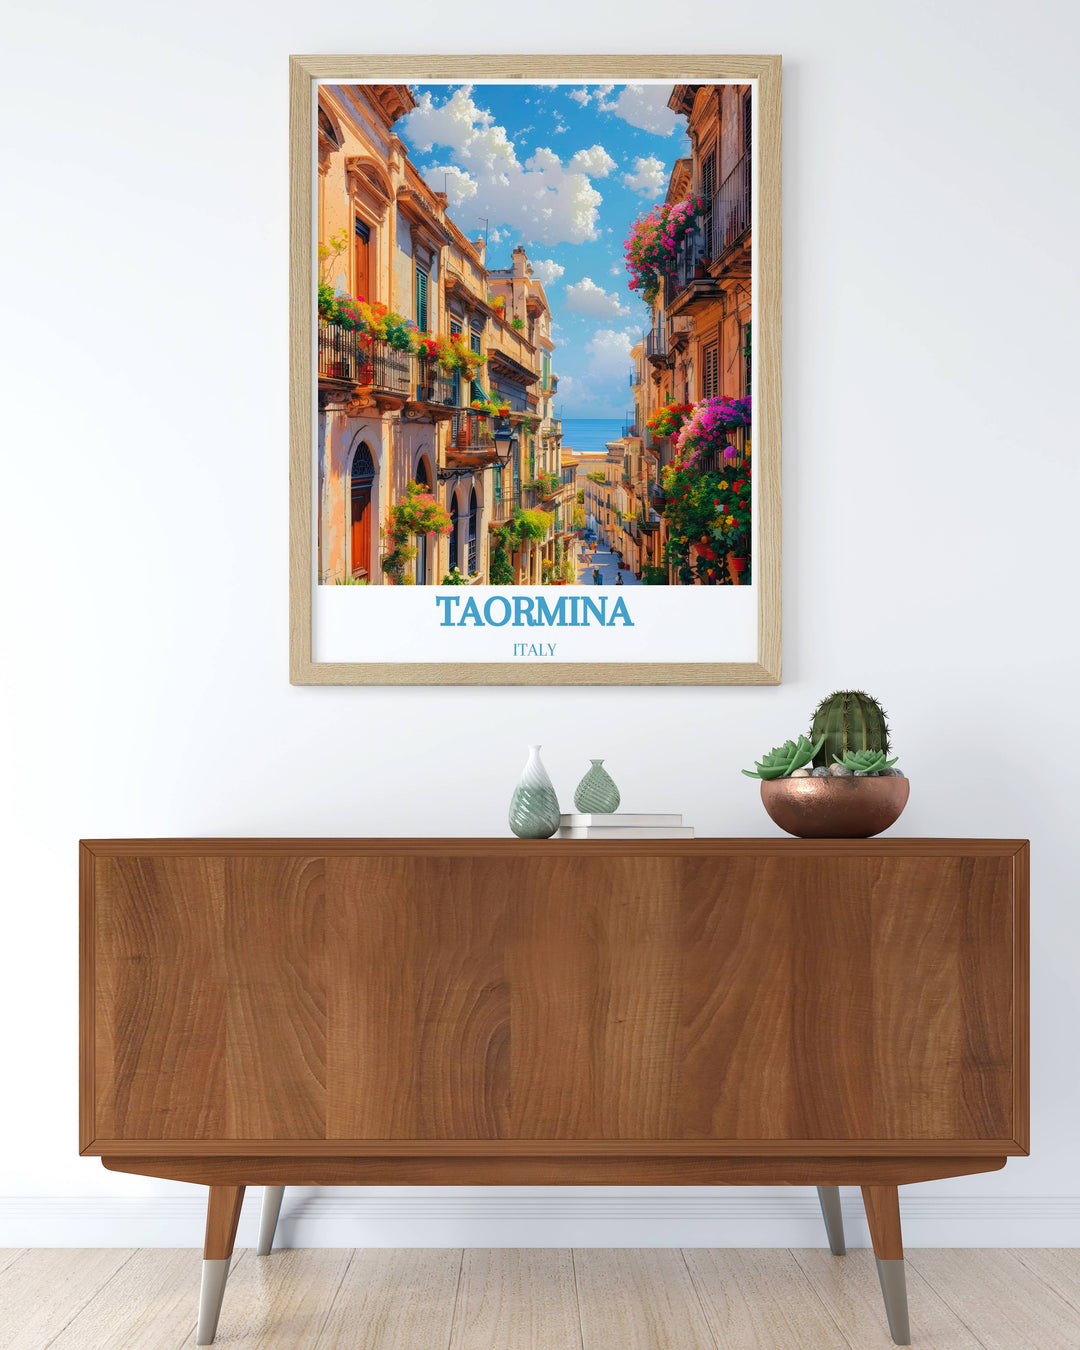 Vintage Italy poster capturing the essence of Taorminas historic charm, ideal for creating a sophisticated and nostalgic ambiance in any space, blending classic design with modern artistry.